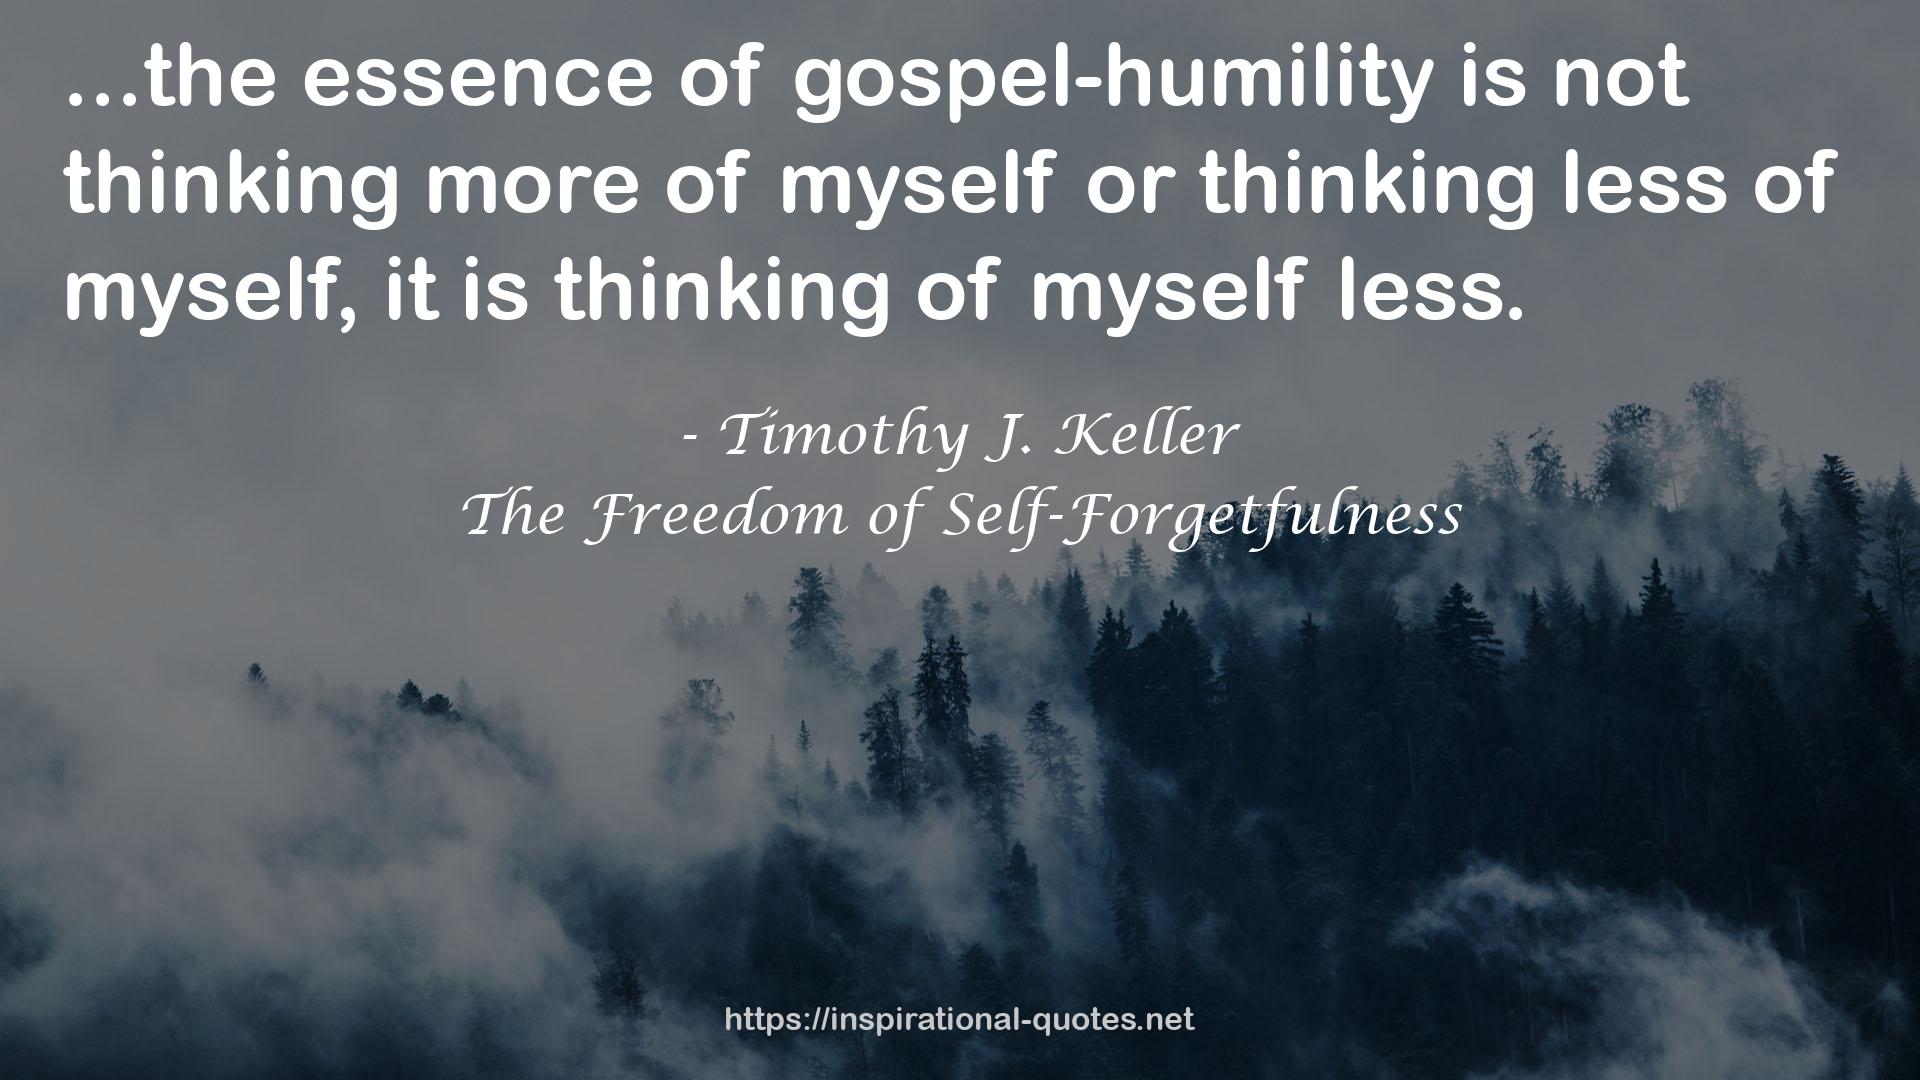 The Freedom of Self-Forgetfulness QUOTES